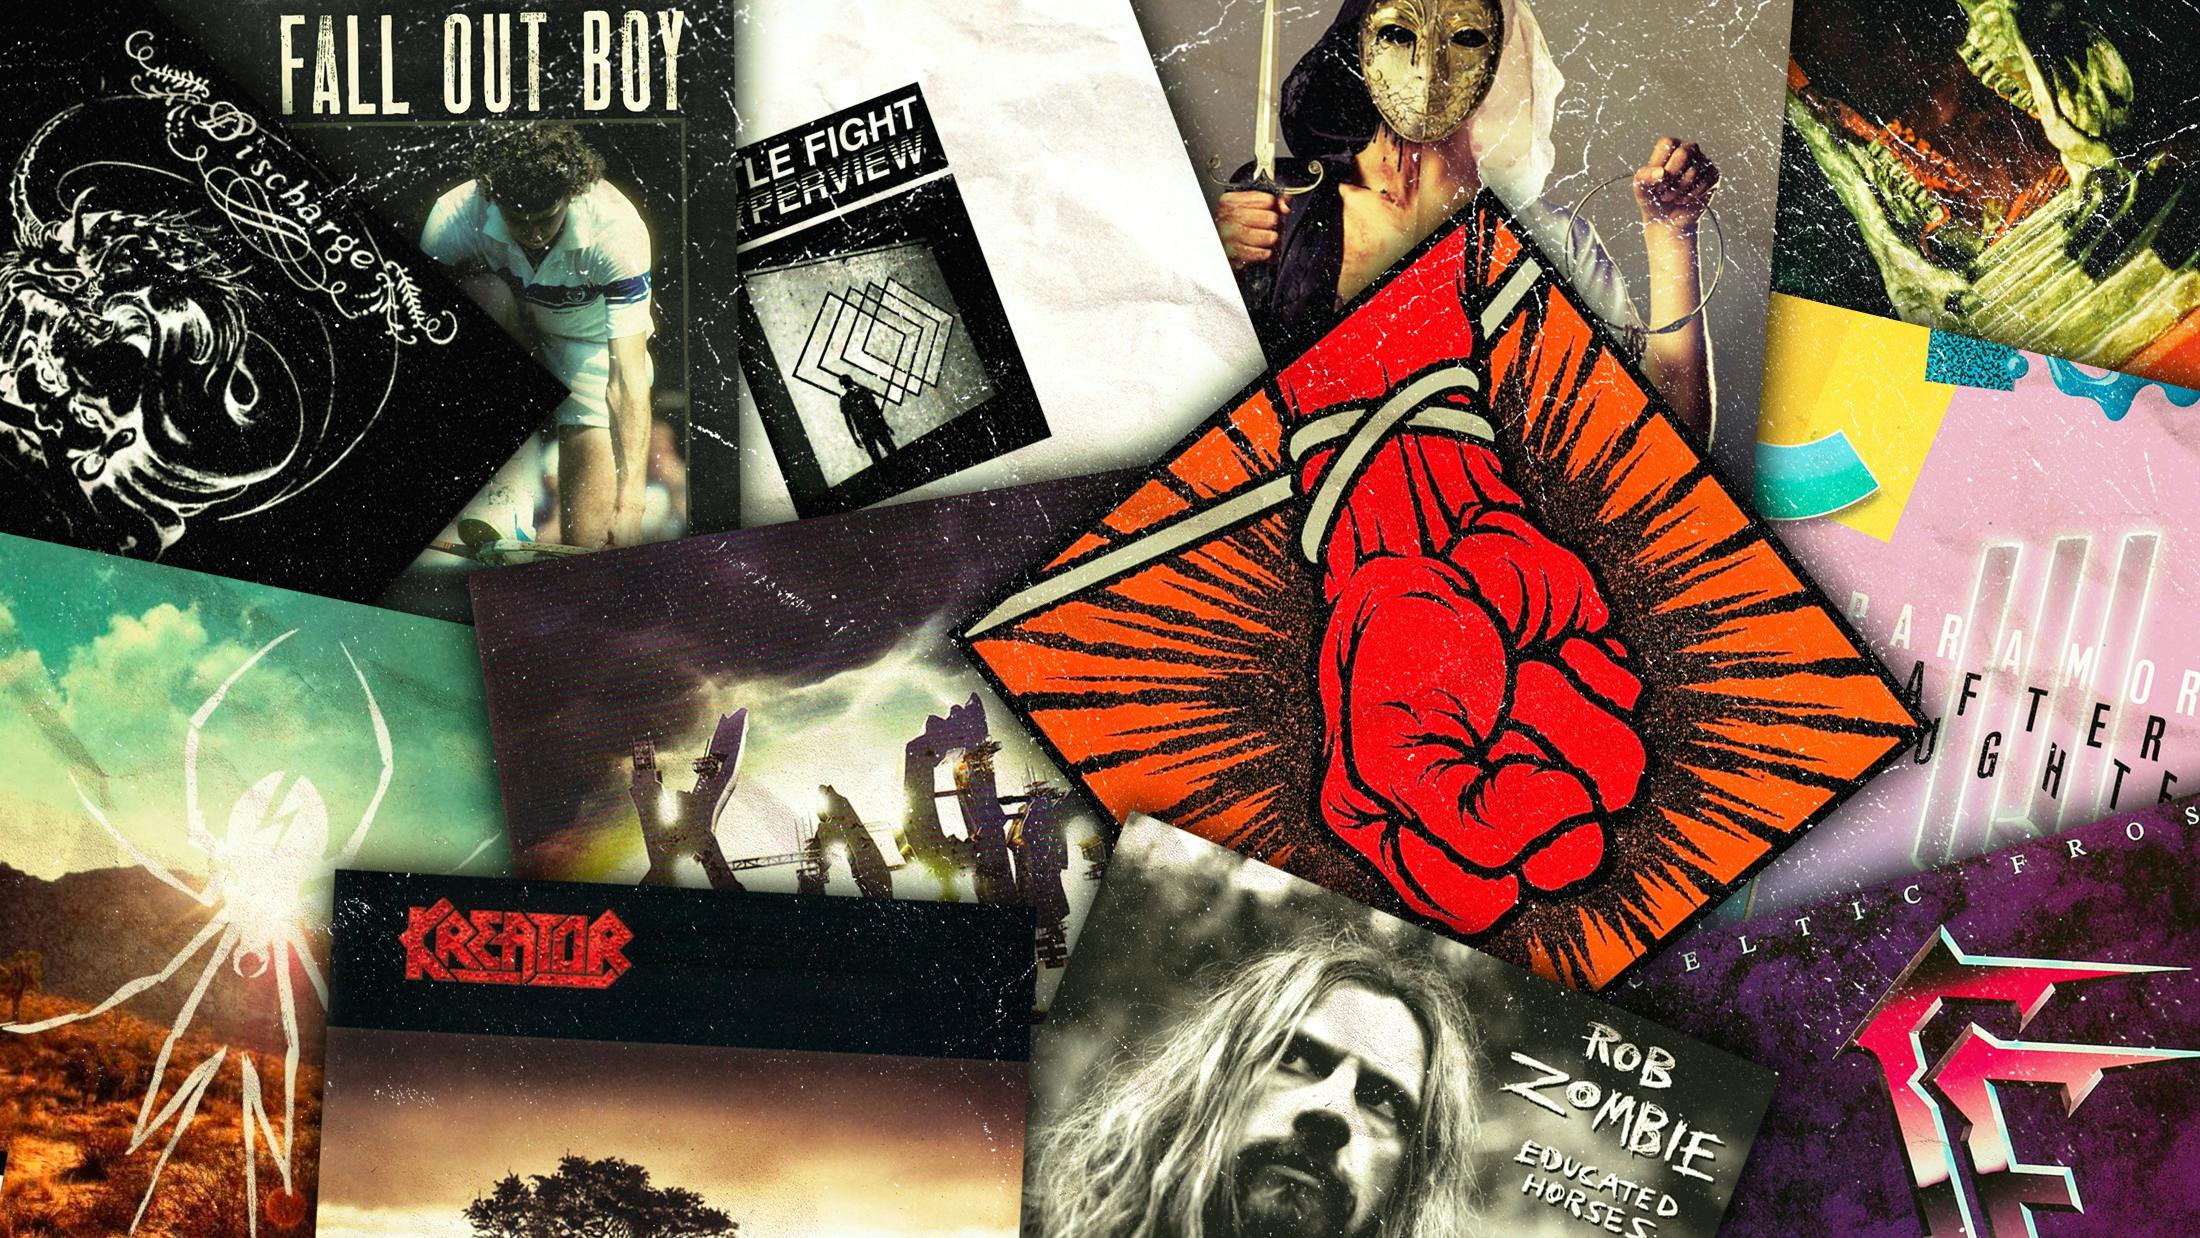 12 albums where a band did something totally unexpected